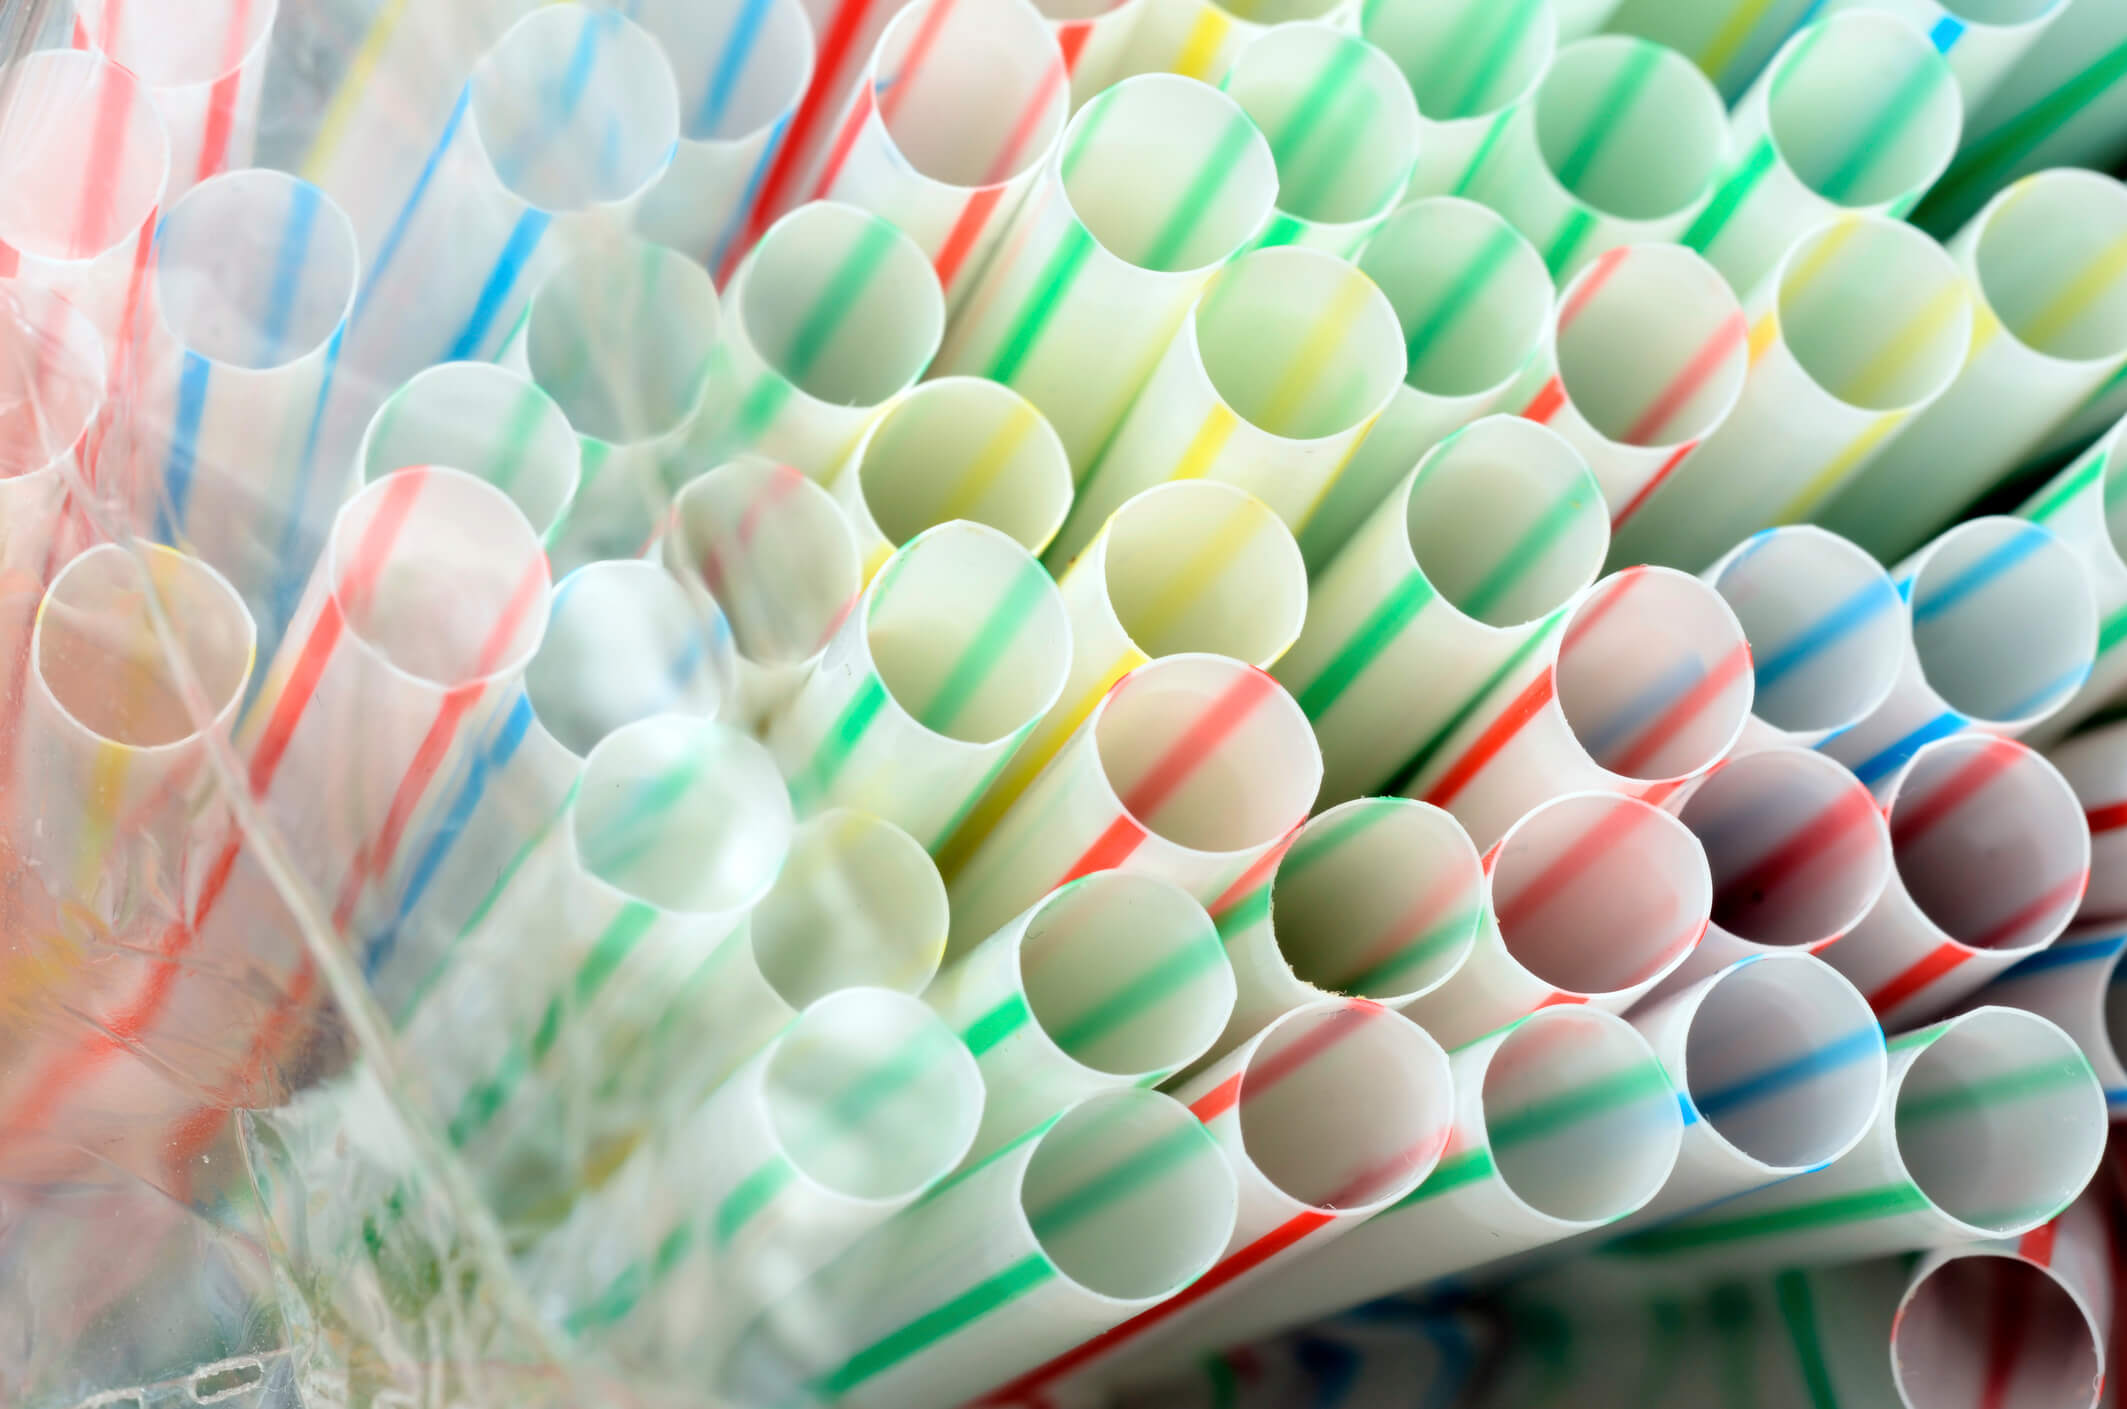 The plastic straw ban can negatively impact the disabled.